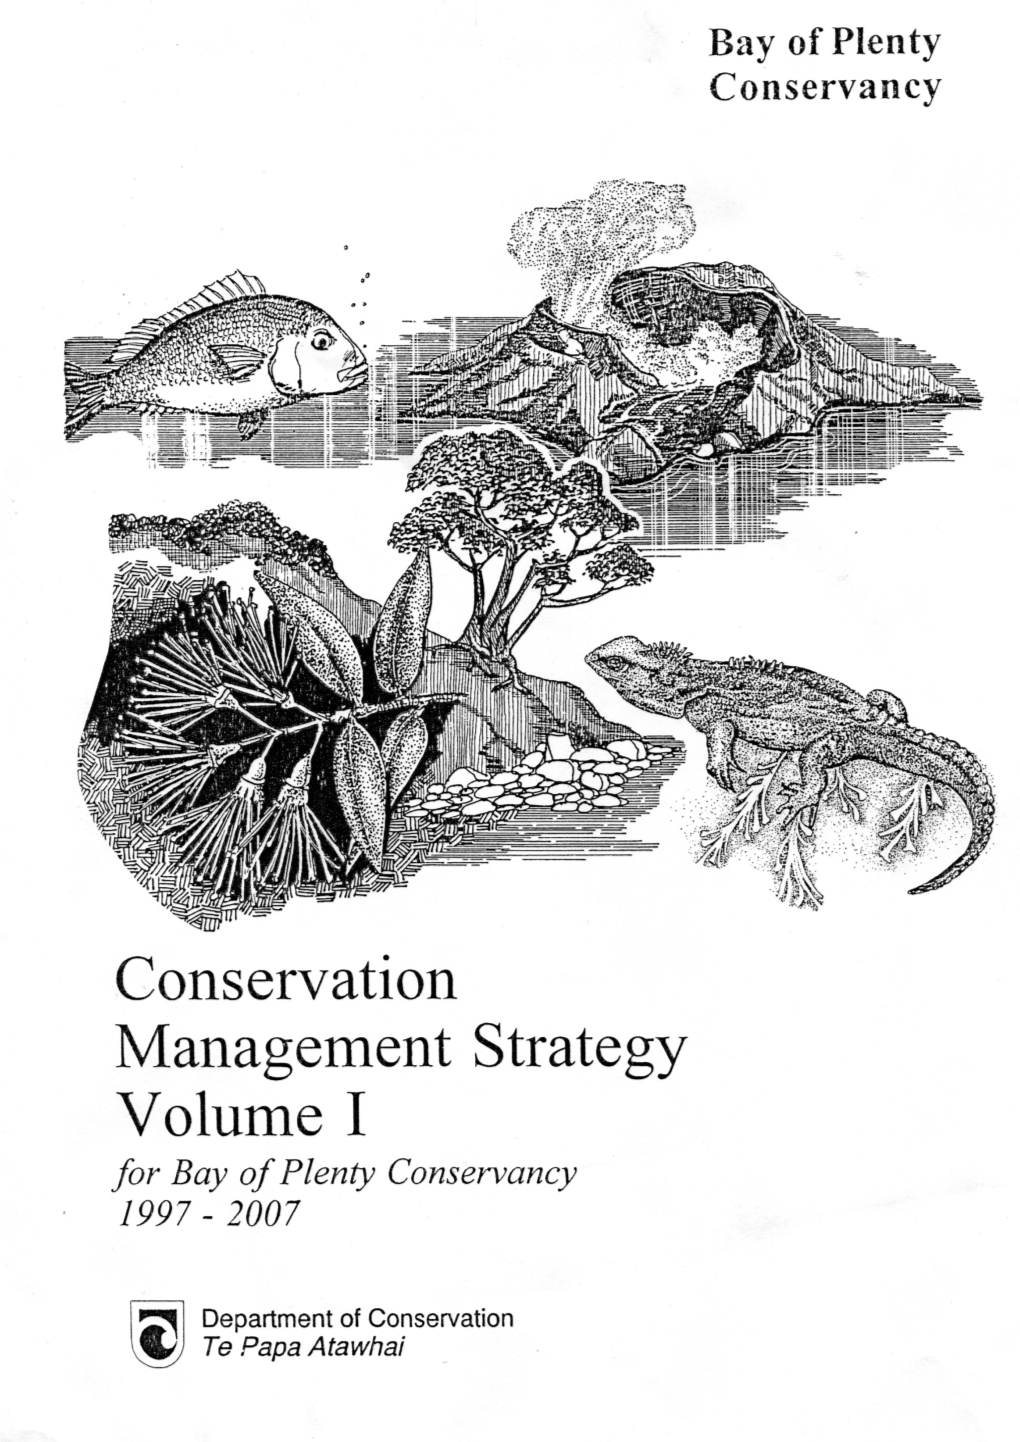 Bay of Plenty Conservation Management Strategy Volume 1 1997-2007 Ii Bay of Plenty Conservation Management Strategy Volume 1 1997-2007 Table of Contents